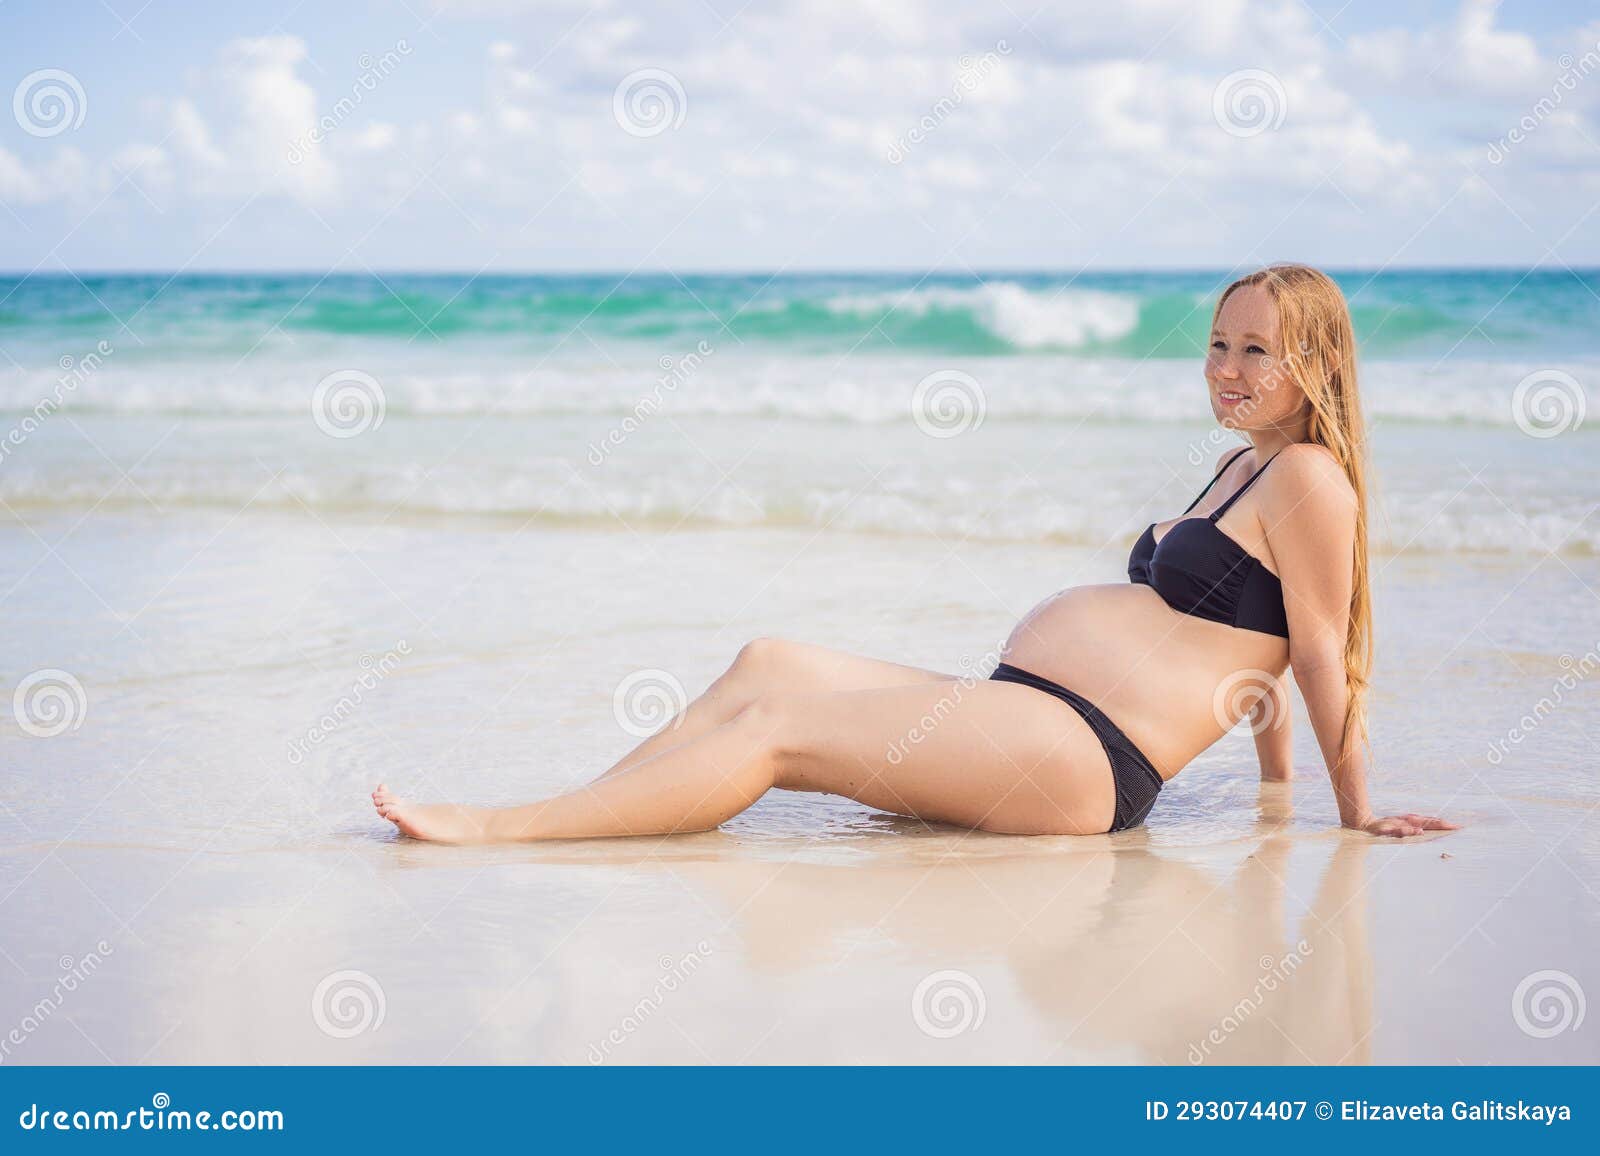 Radiant Pregnant Woman in a Swimsuit, Amid the Stunning Backdrop of a  Turquoise Sea. Serene Beauty of Maternity by the Stock Image - Image of  maternal, peaceful: 293074407